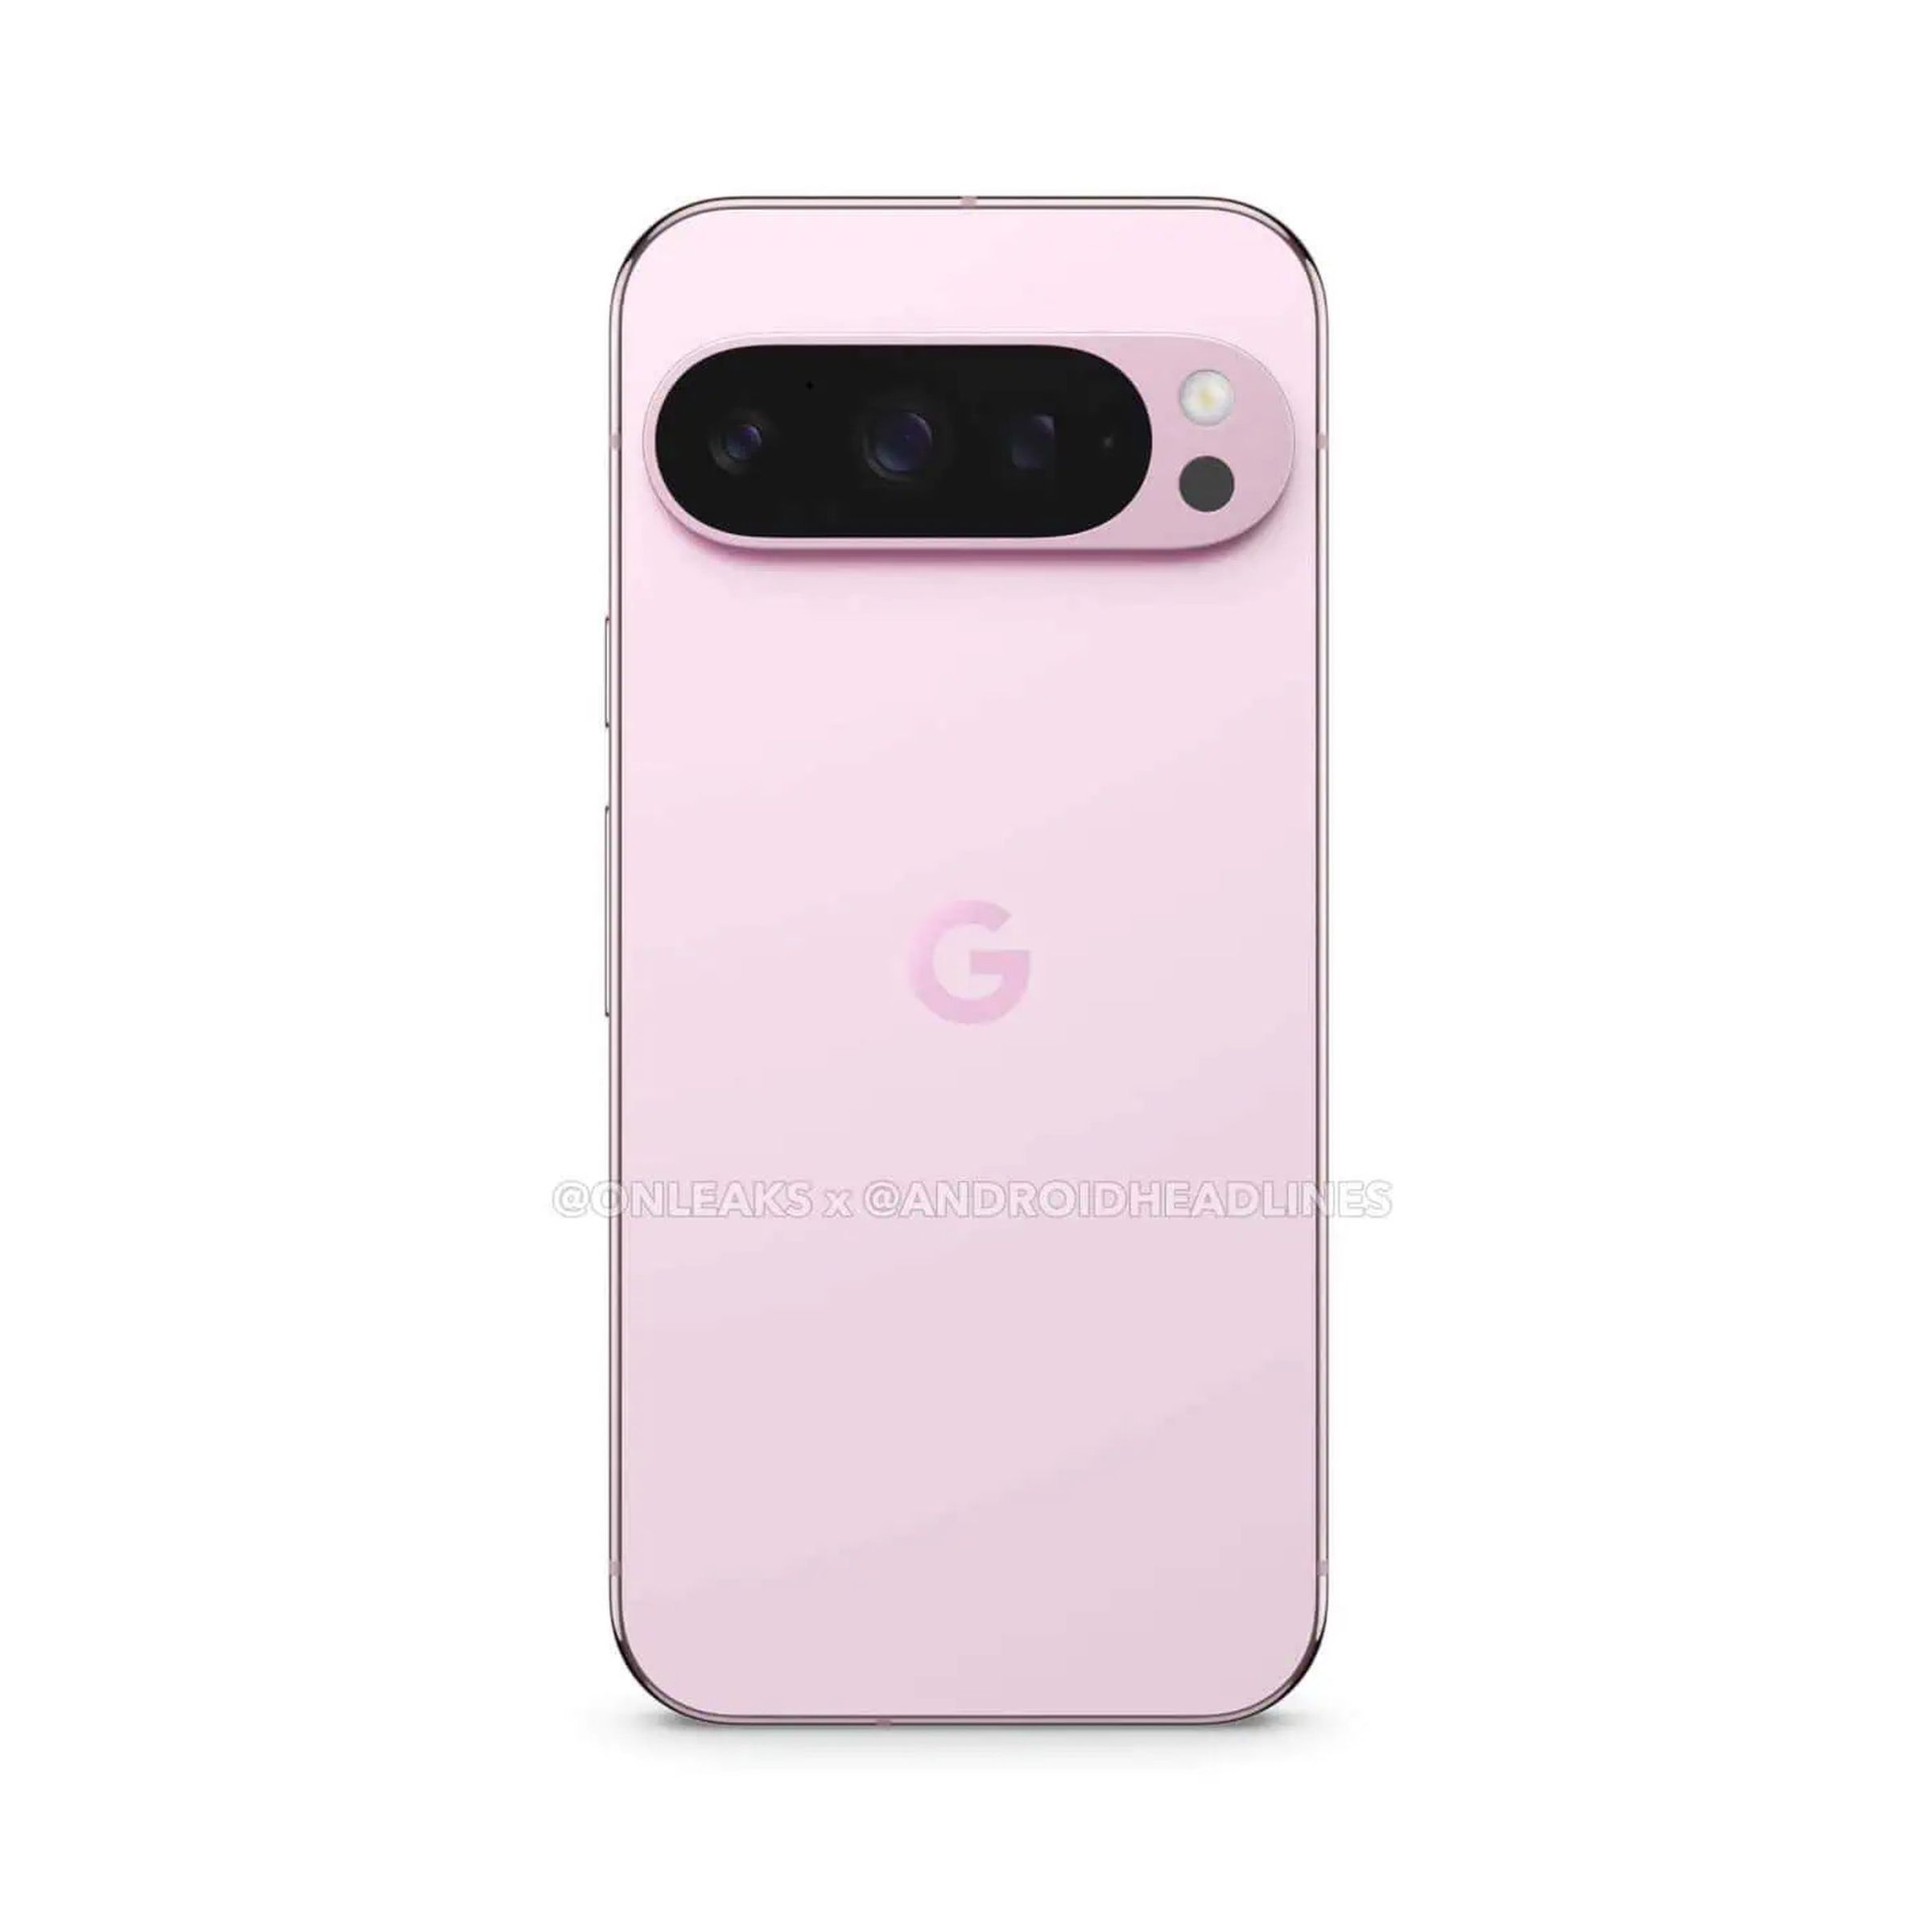 A leaked photo showing a rose-colored Pixel 9 Pro